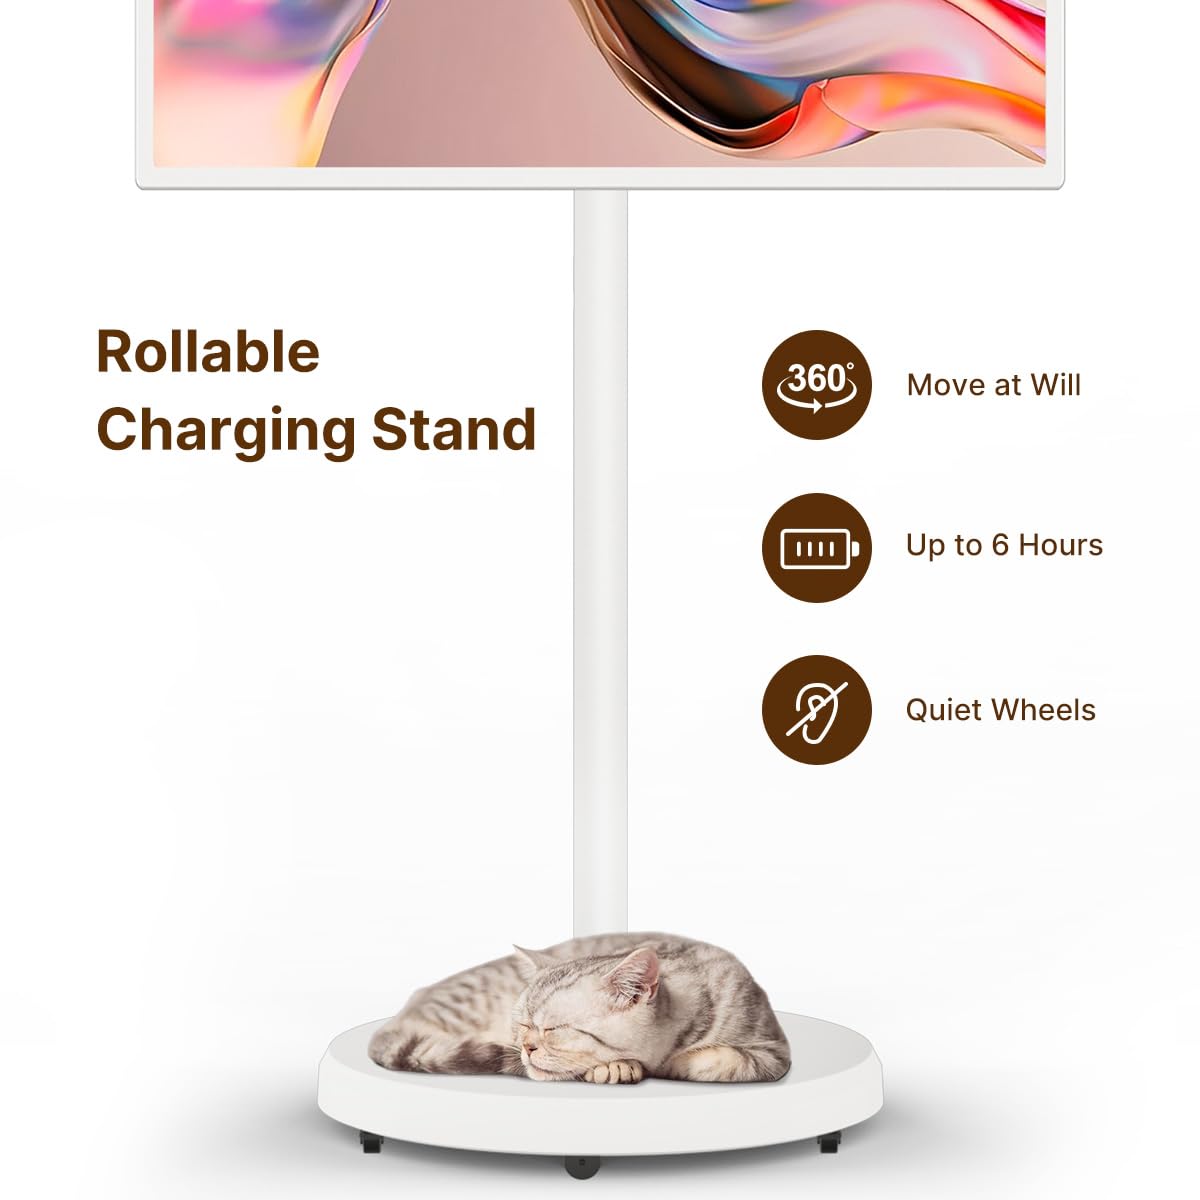 RollableCharging Stand